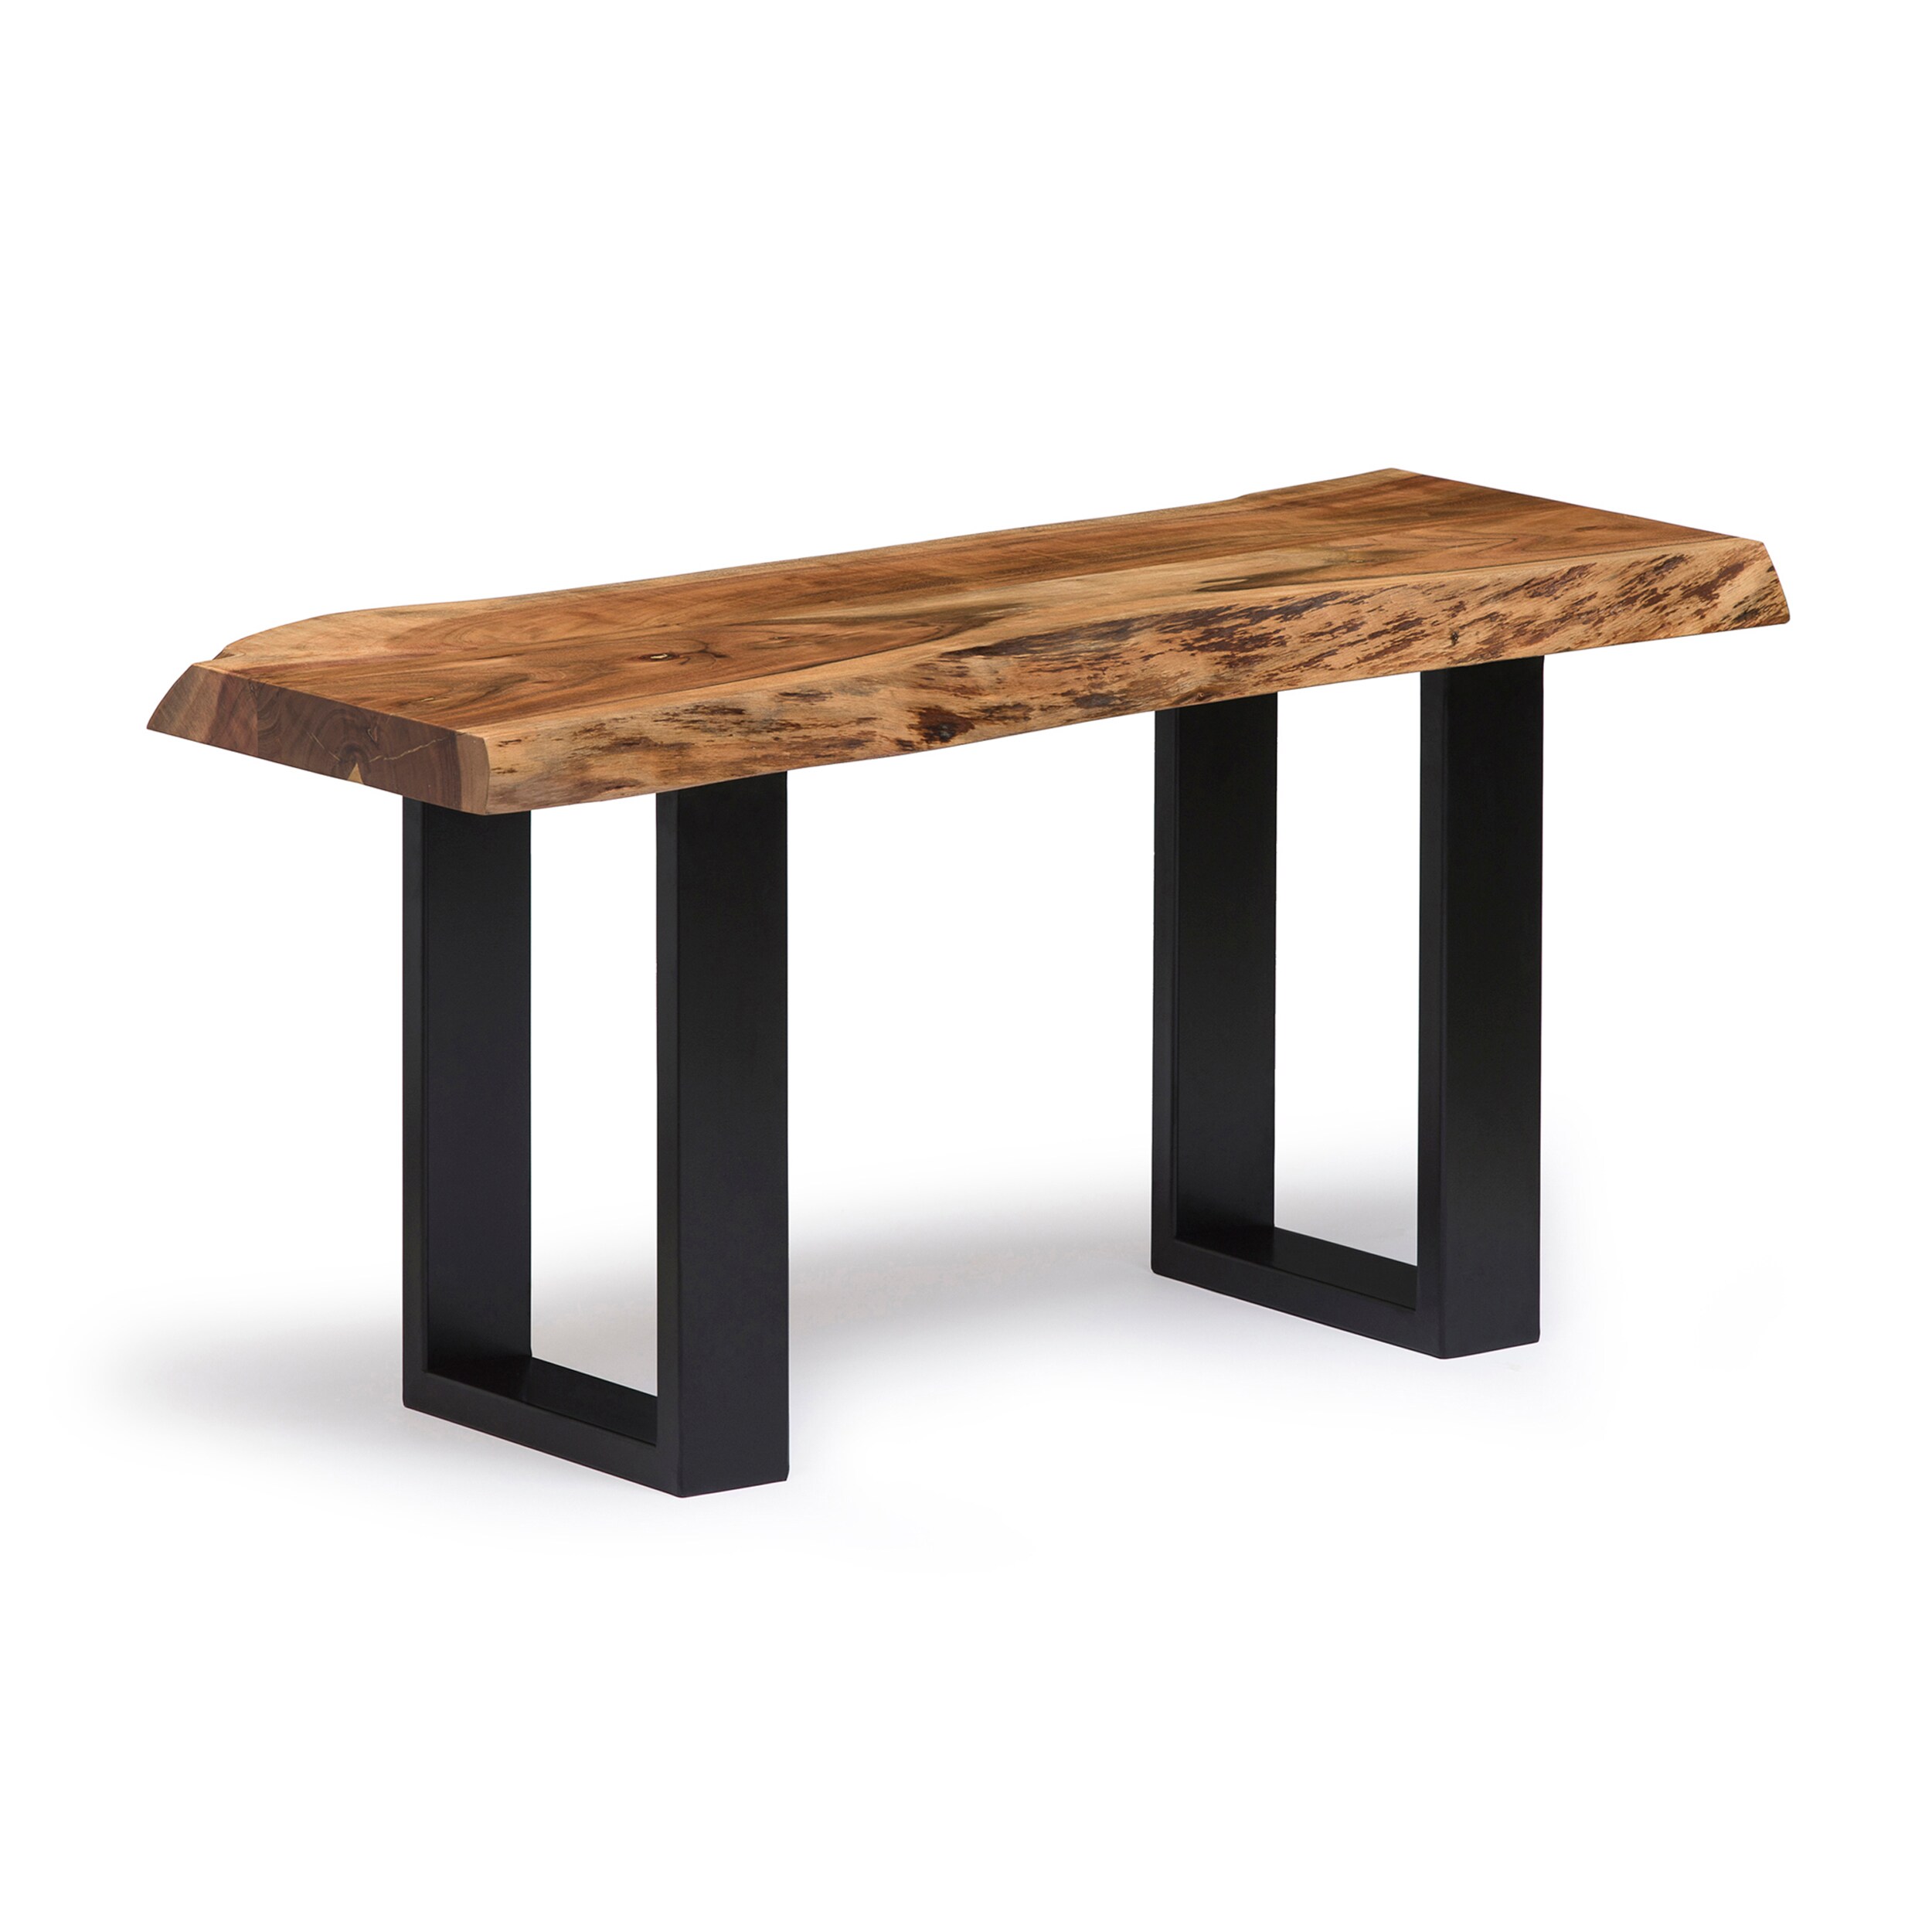 Alaterre Furniture Alpine Natural Live Edge 36 in. Bench with Coat